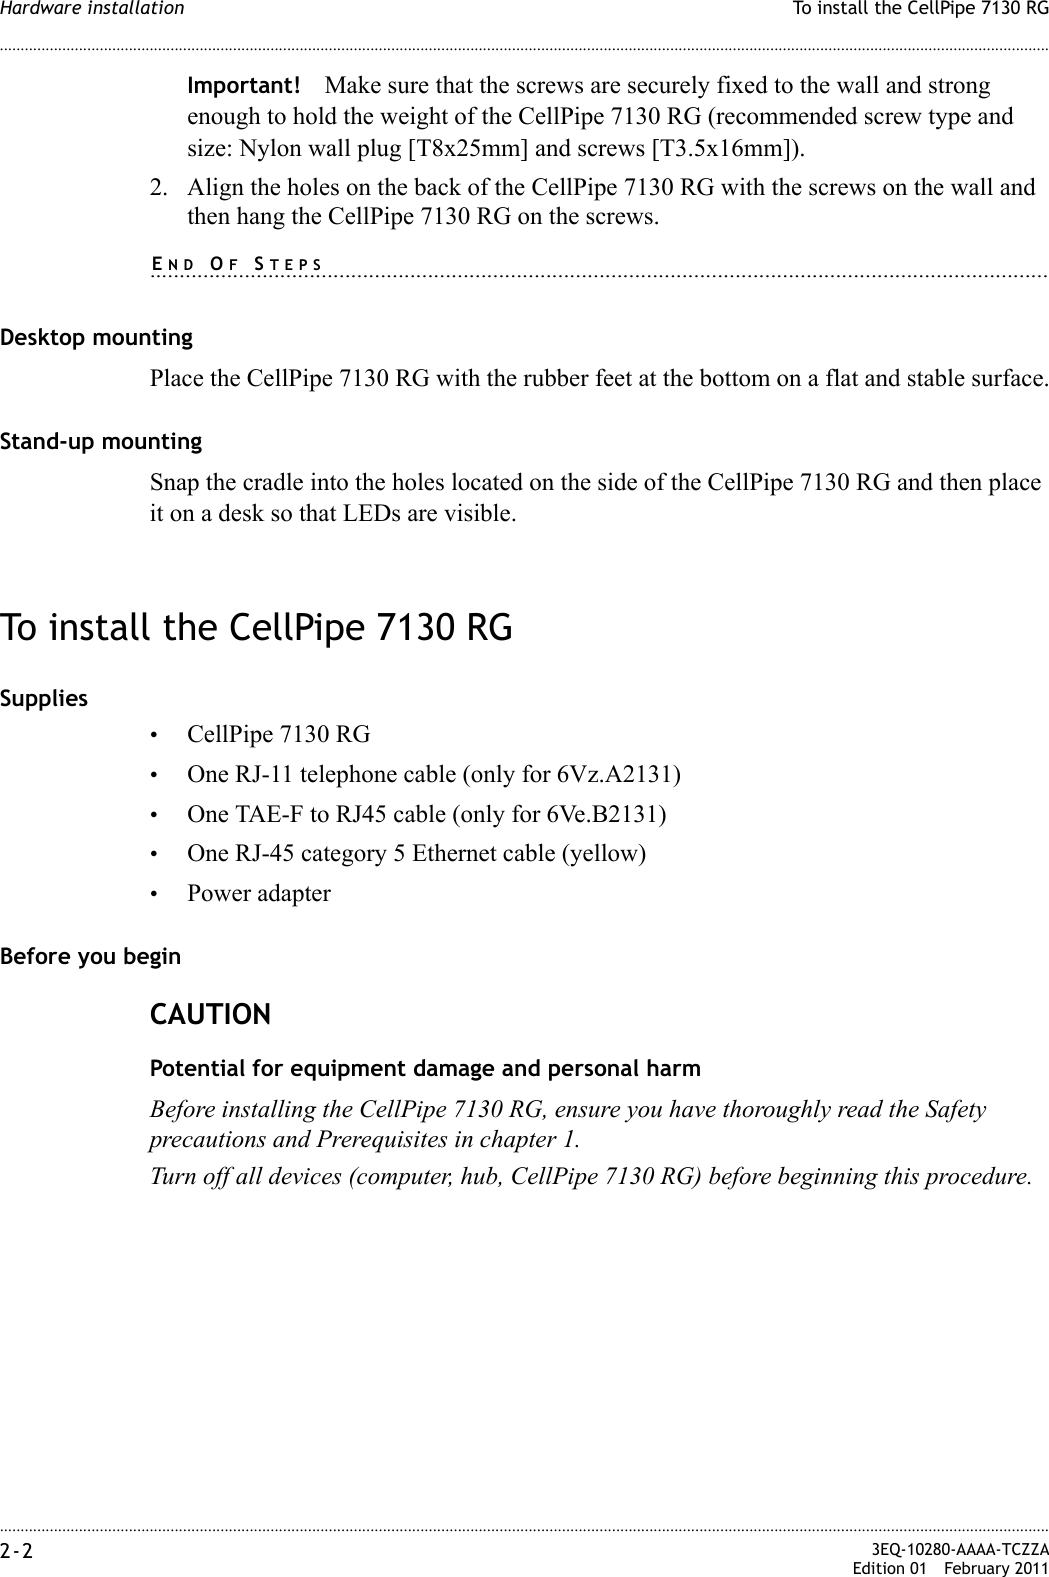 ............................................................................................................................................................................................................................................................To install the CellPipe 7130 RGHardware installation2-2  3EQ-10280-AAAA-TCZZAEdition 01 February 2011............................................................................................................................................................................................................................................................Important! Make sure that the screws are securely fixed to the wall and strong enough to hold the weight of the CellPipe 7130 RG (recommended screw type and size: Nylon wall plug [T8x25mm] and screws [T3.5x16mm]).2. Align the holes on the back of the CellPipe 7130 RG with the screws on the wall and then hang the CellPipe 7130 RG on the screws.........................................................................................................................................................END OF STEPSDesktop mountingPlace the CellPipe 7130 RG with the rubber feet at the bottom on a flat and stable surface.Stand-up mountingSnap the cradle into the holes located on the side of the CellPipe 7130 RG and then place it on a desk so that LEDs are visible.To install the CellPipe 7130 RGSupplies•CellPipe 7130 RG•One RJ-11 telephone cable (only for 6Vz.A2131)•One TAE-F to RJ45 cable (only for 6Ve.B2131)•One RJ-45 category 5 Ethernet cable (yellow)•Power adapterBefore you beginCAUTIONPotential for equipment damage and personal harmBefore installing the CellPipe 7130 RG, ensure you have thoroughly read the Safety precautions and Prerequisites in chapter 1.Turn off all devices (computer, hub, CellPipe 7130 RG) before beginning this procedure.